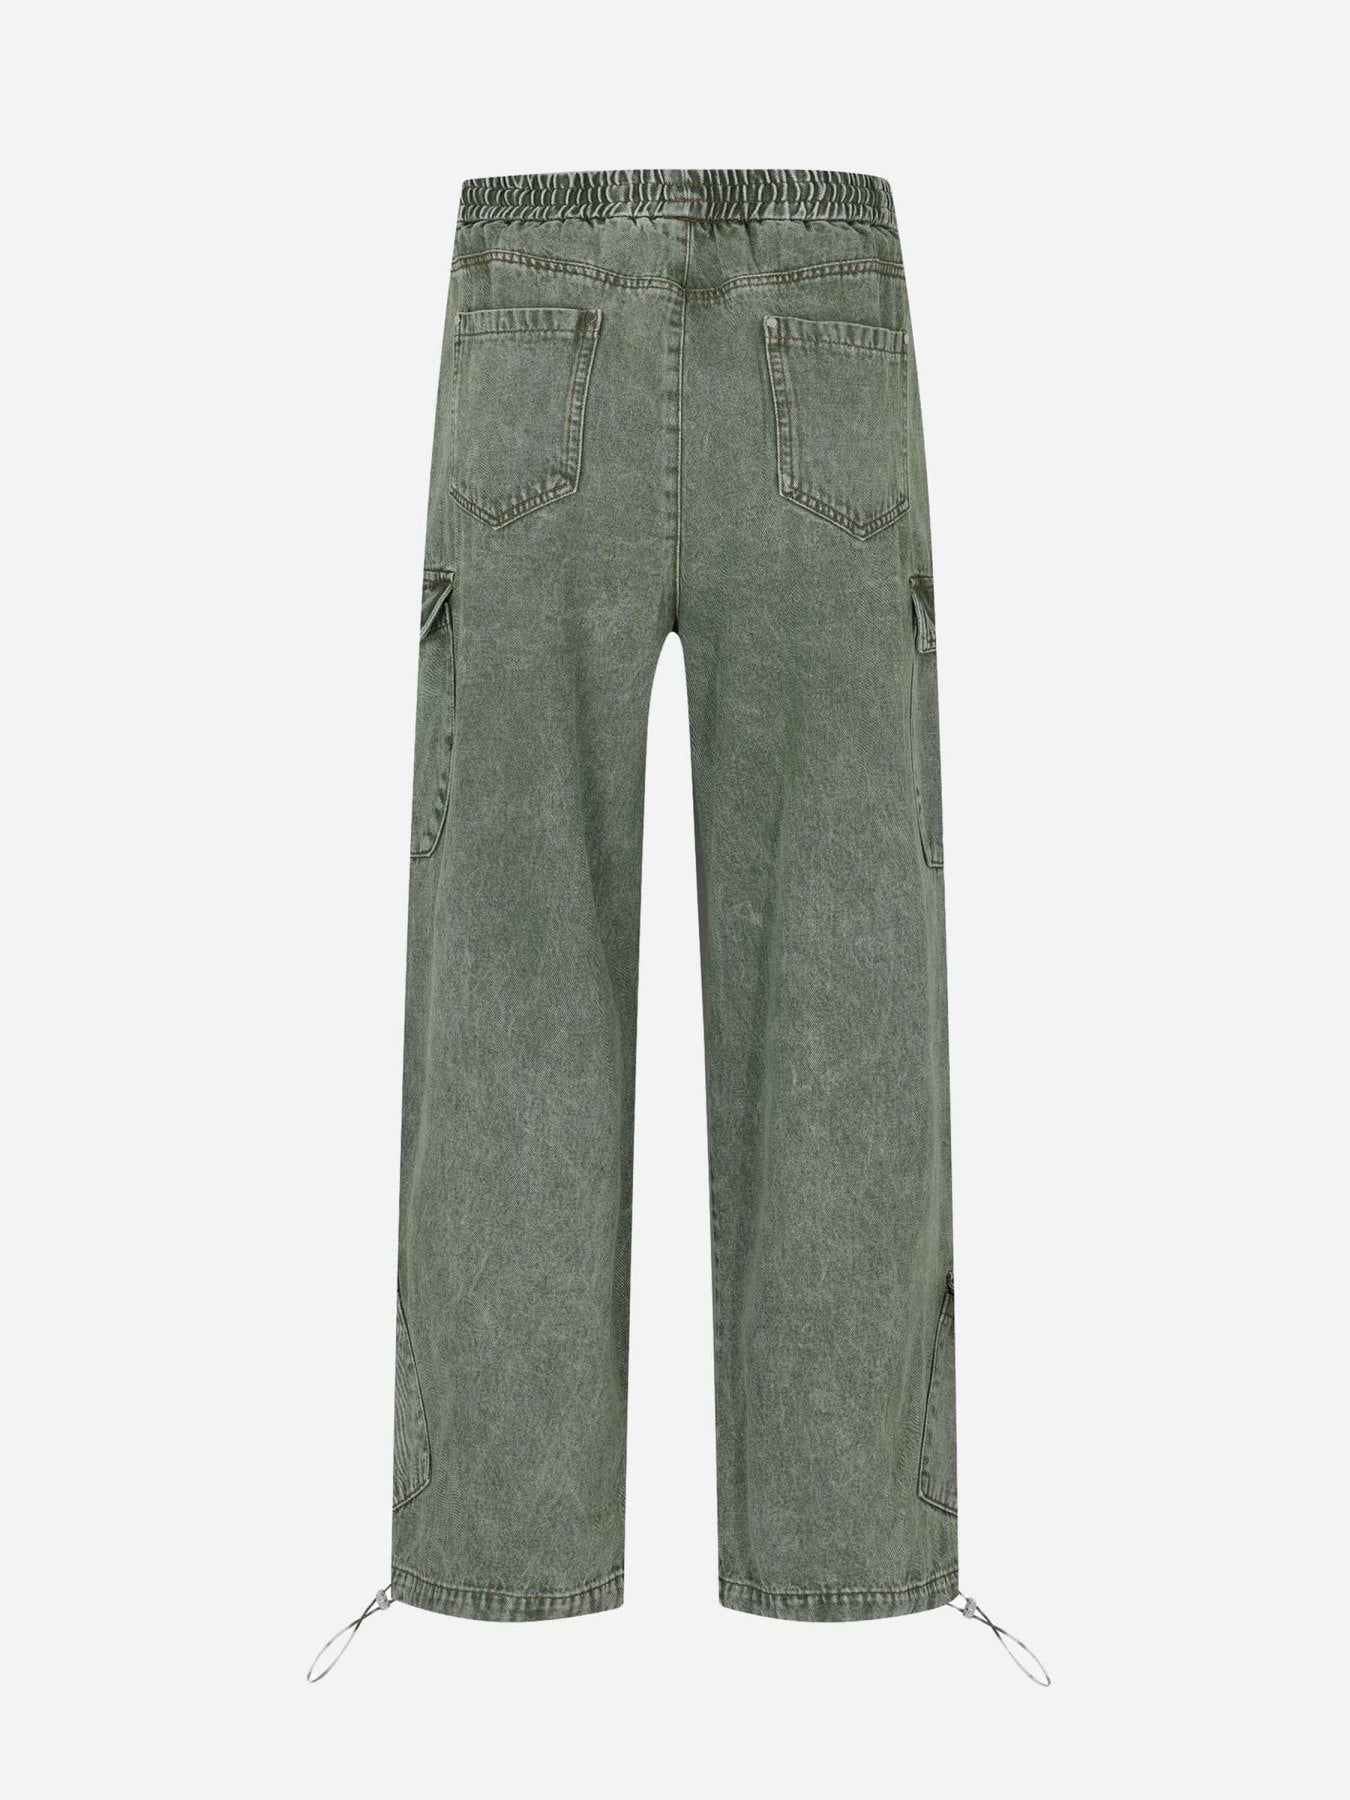 The Supermade Loose Straight Casual Work Pants